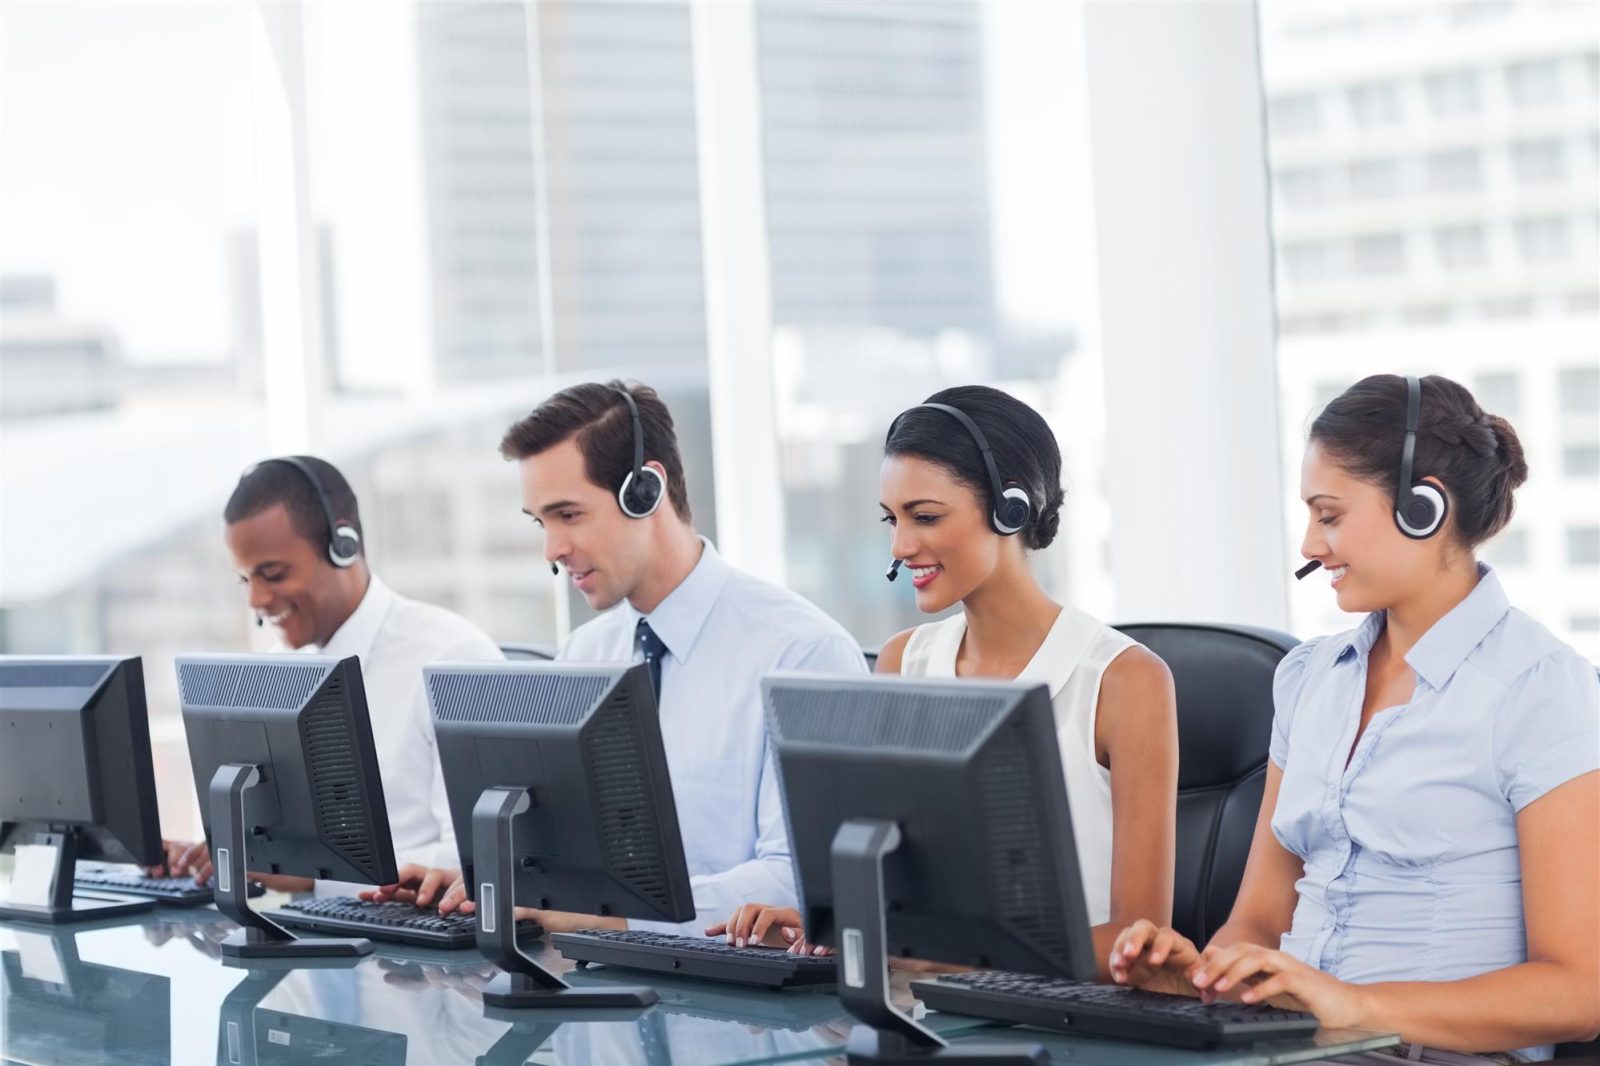 agents using Outbound Call Center Solution